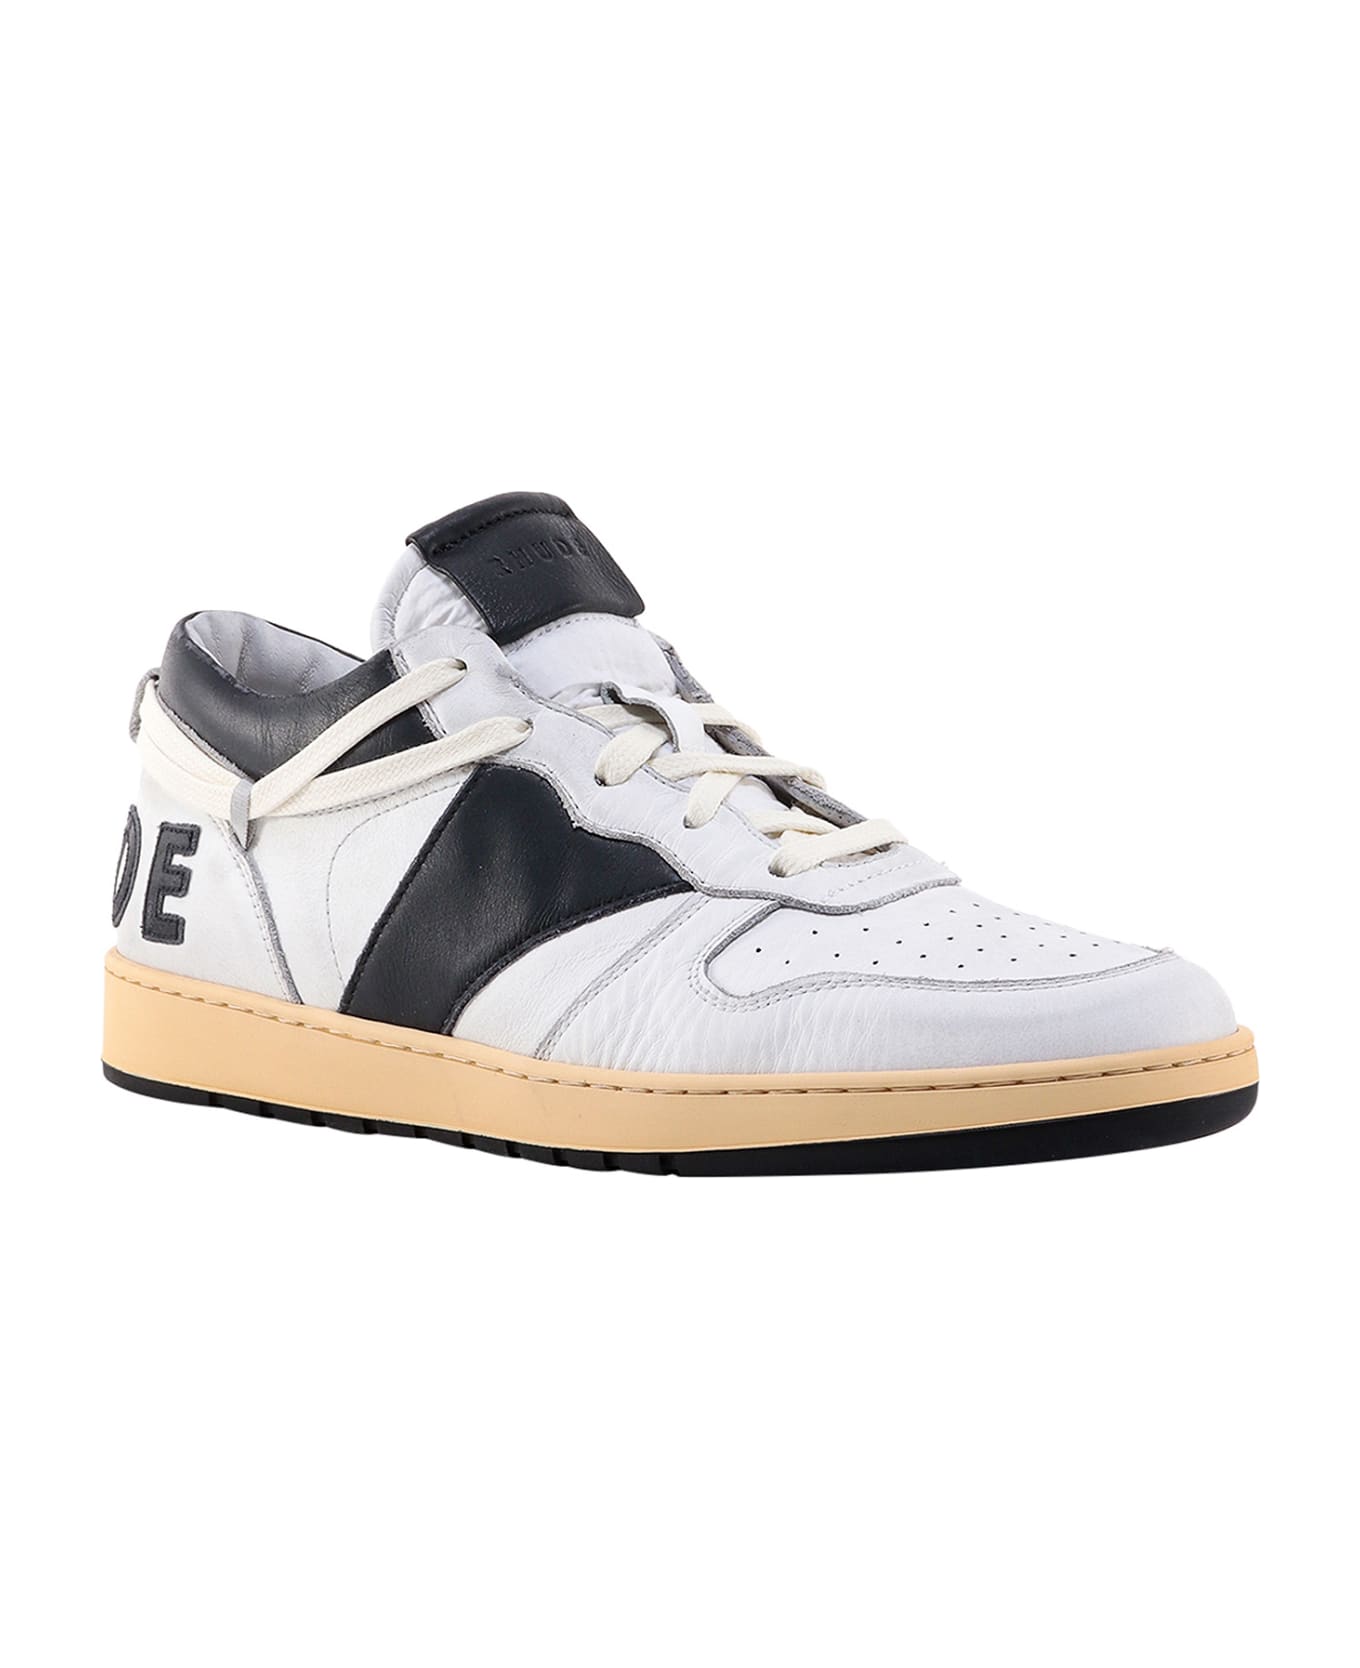 Rhude Rhecess Low Sneakers - White